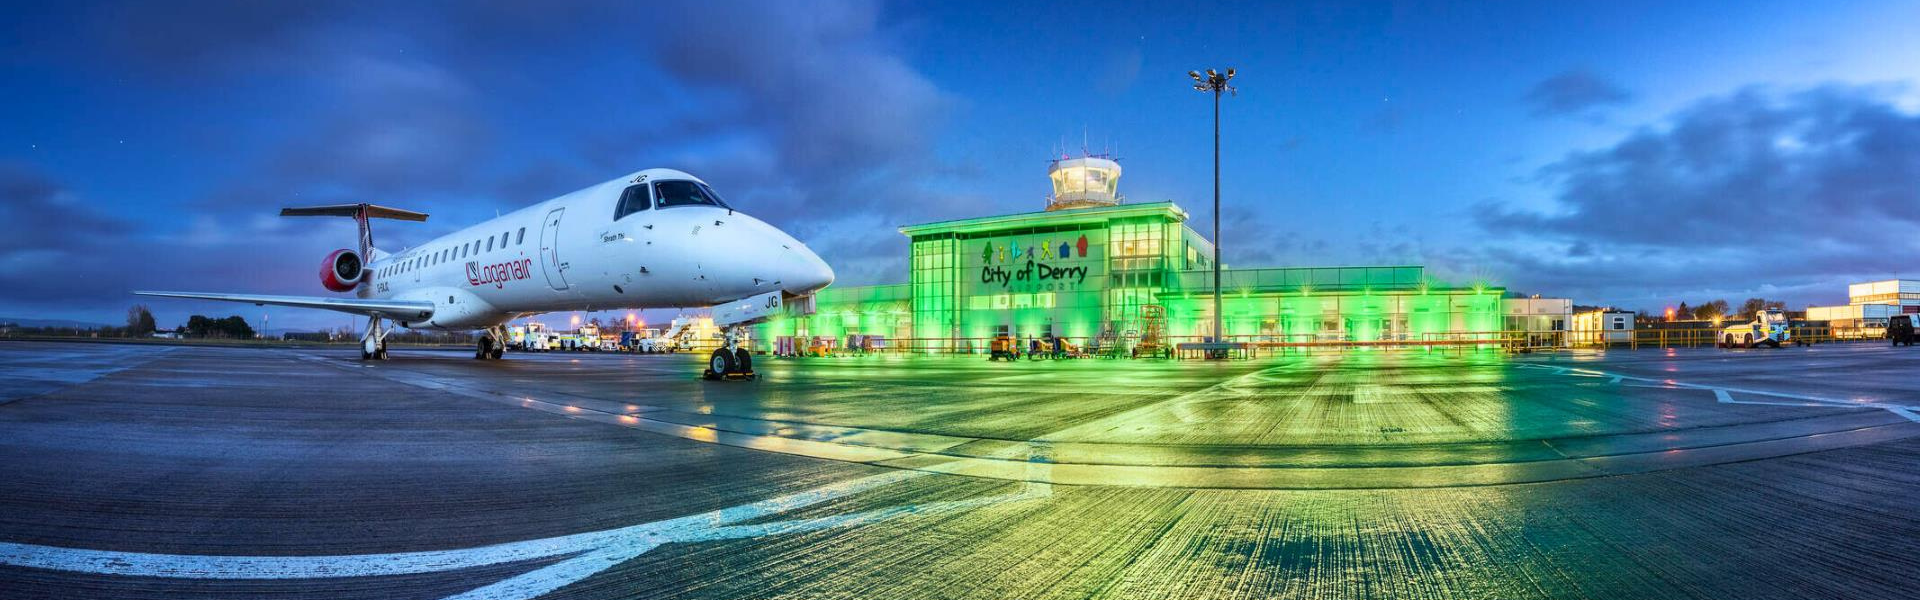 City of Derry Web Airport at Night